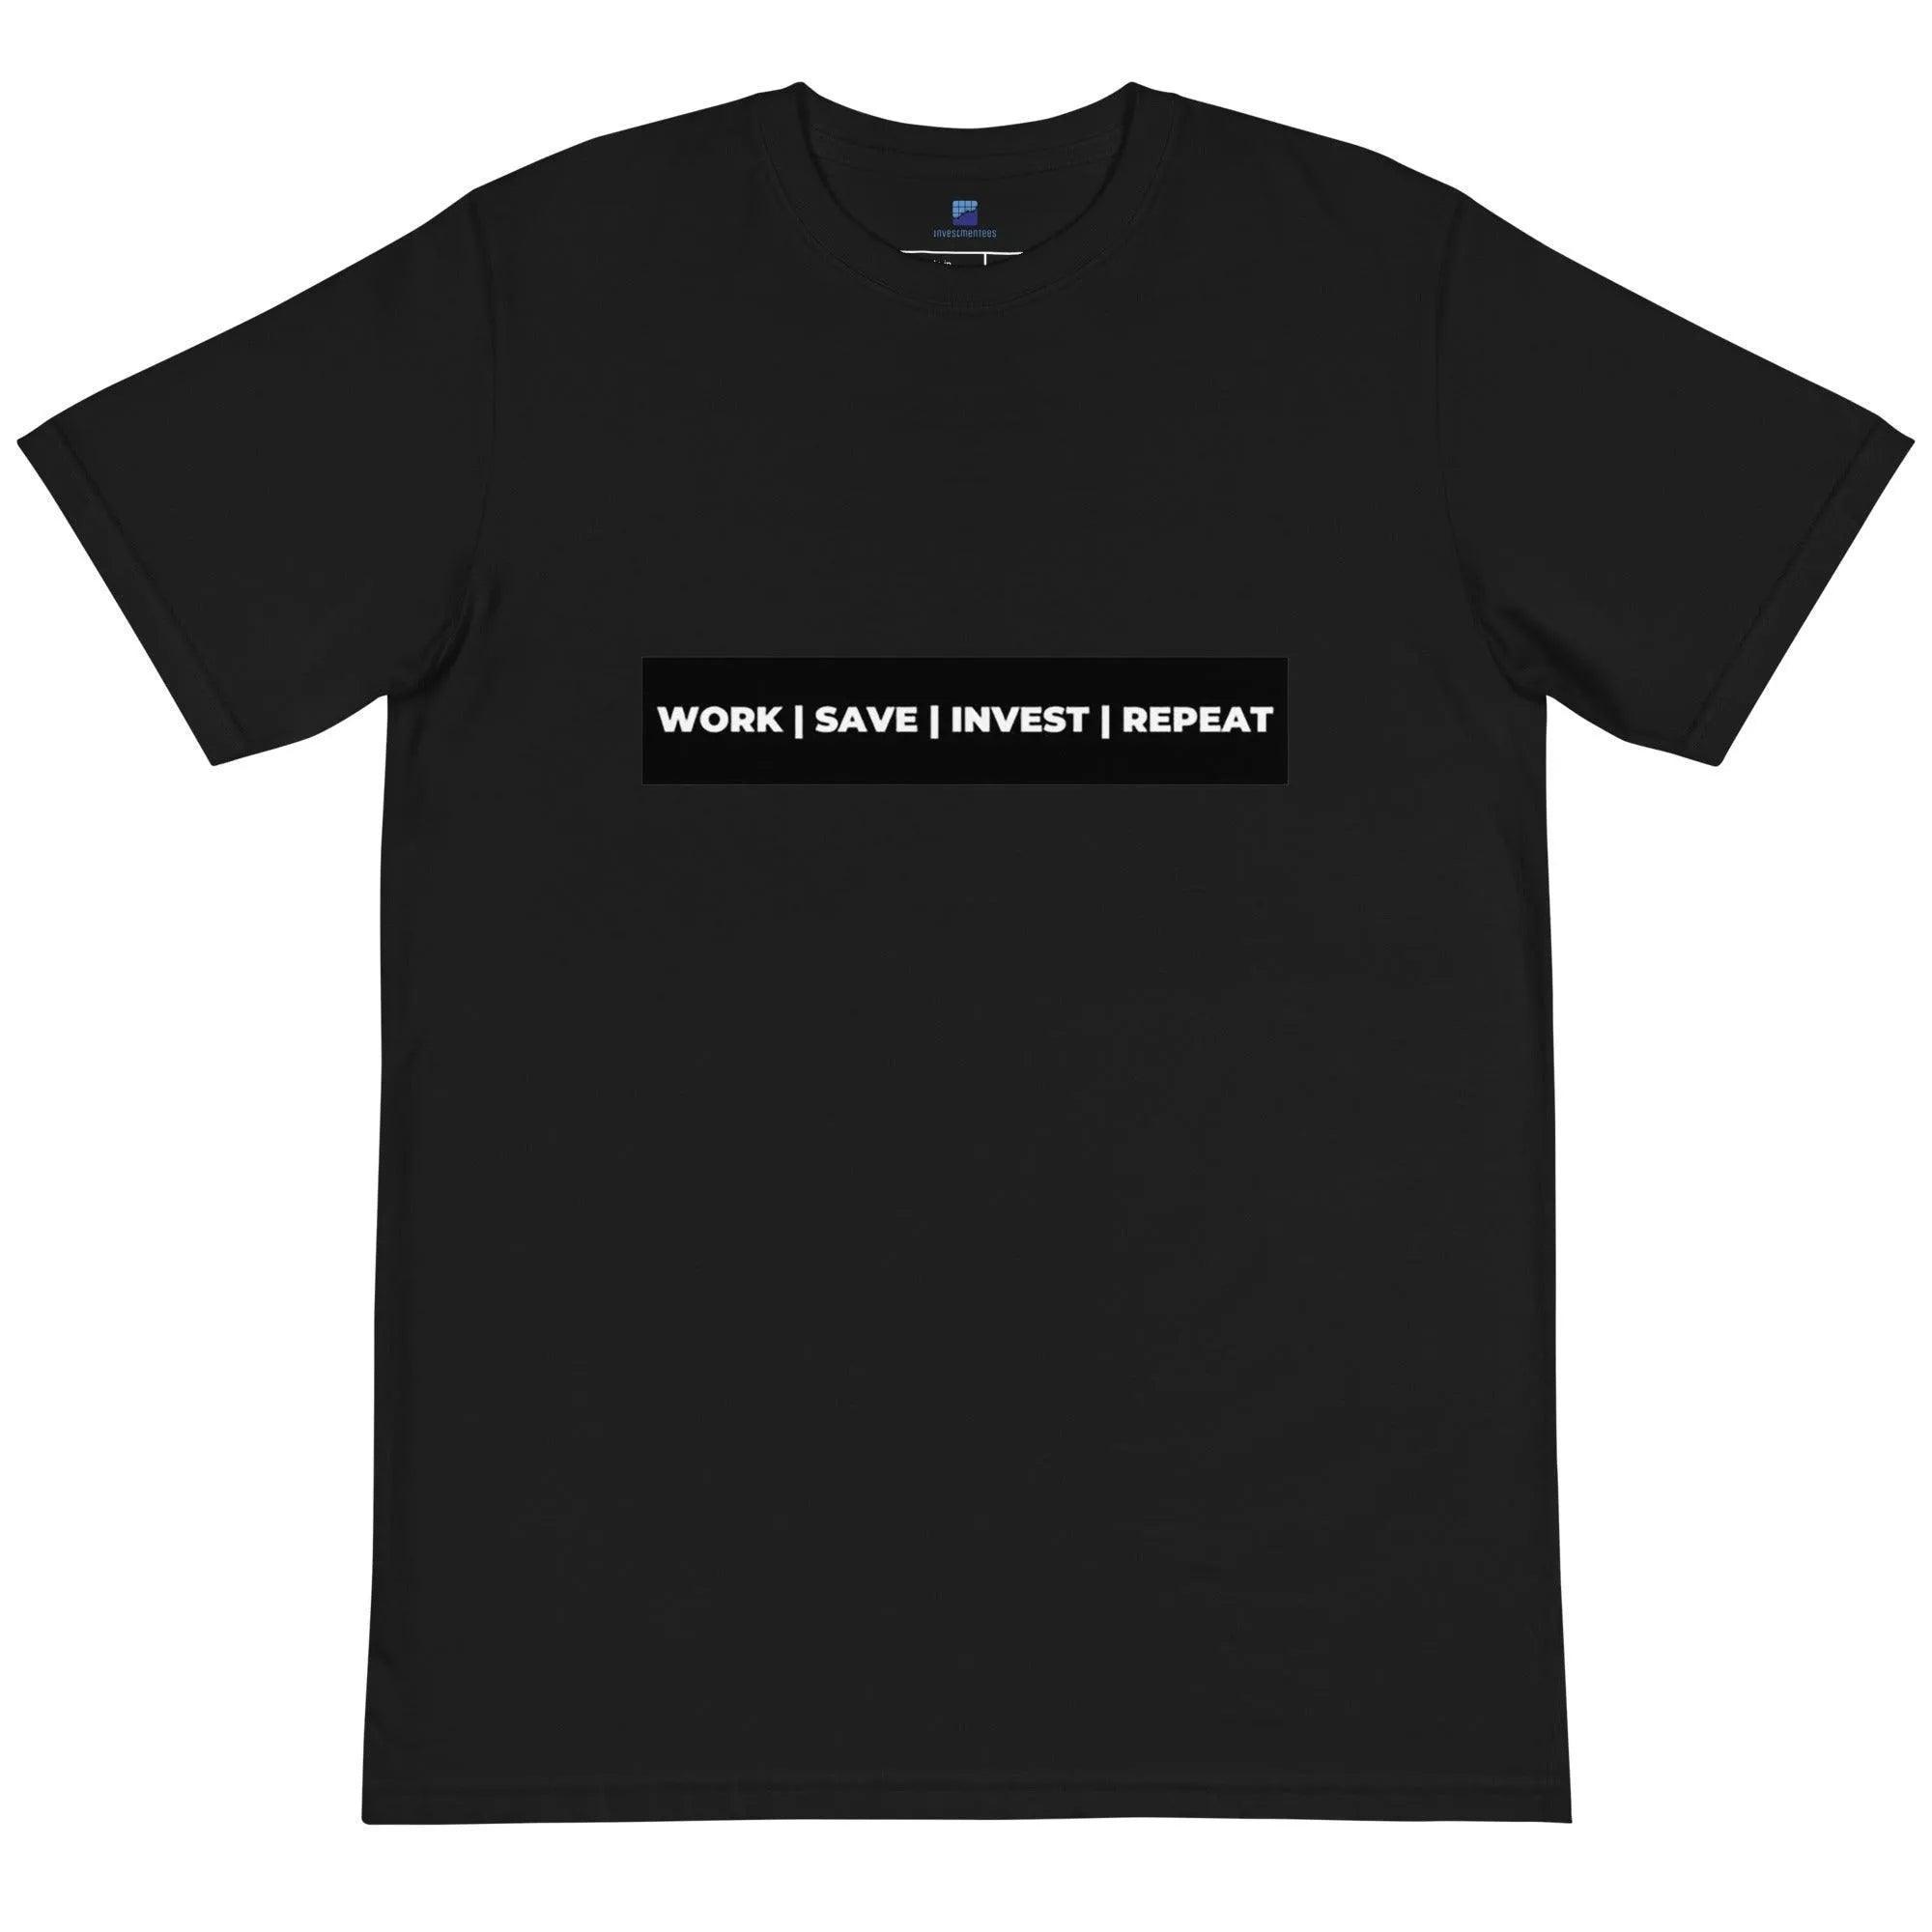 Work | Save | Invest | Money Grow T-Shirt - InvestmenTees